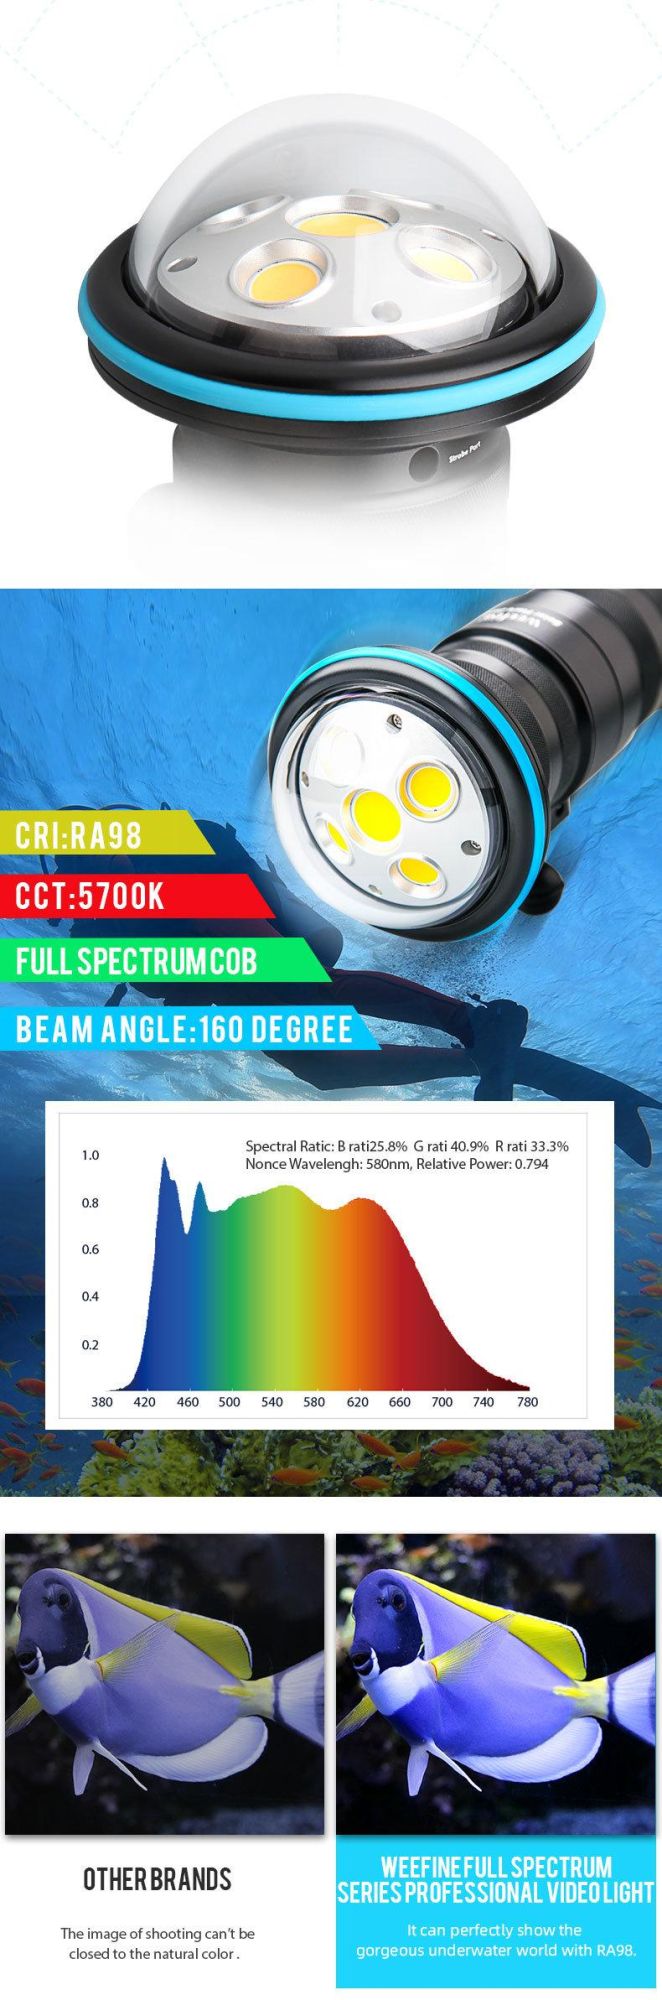 Super Bigger Beam Angle Professional Underwater Diving Photography Light with Multi-COB Light Source